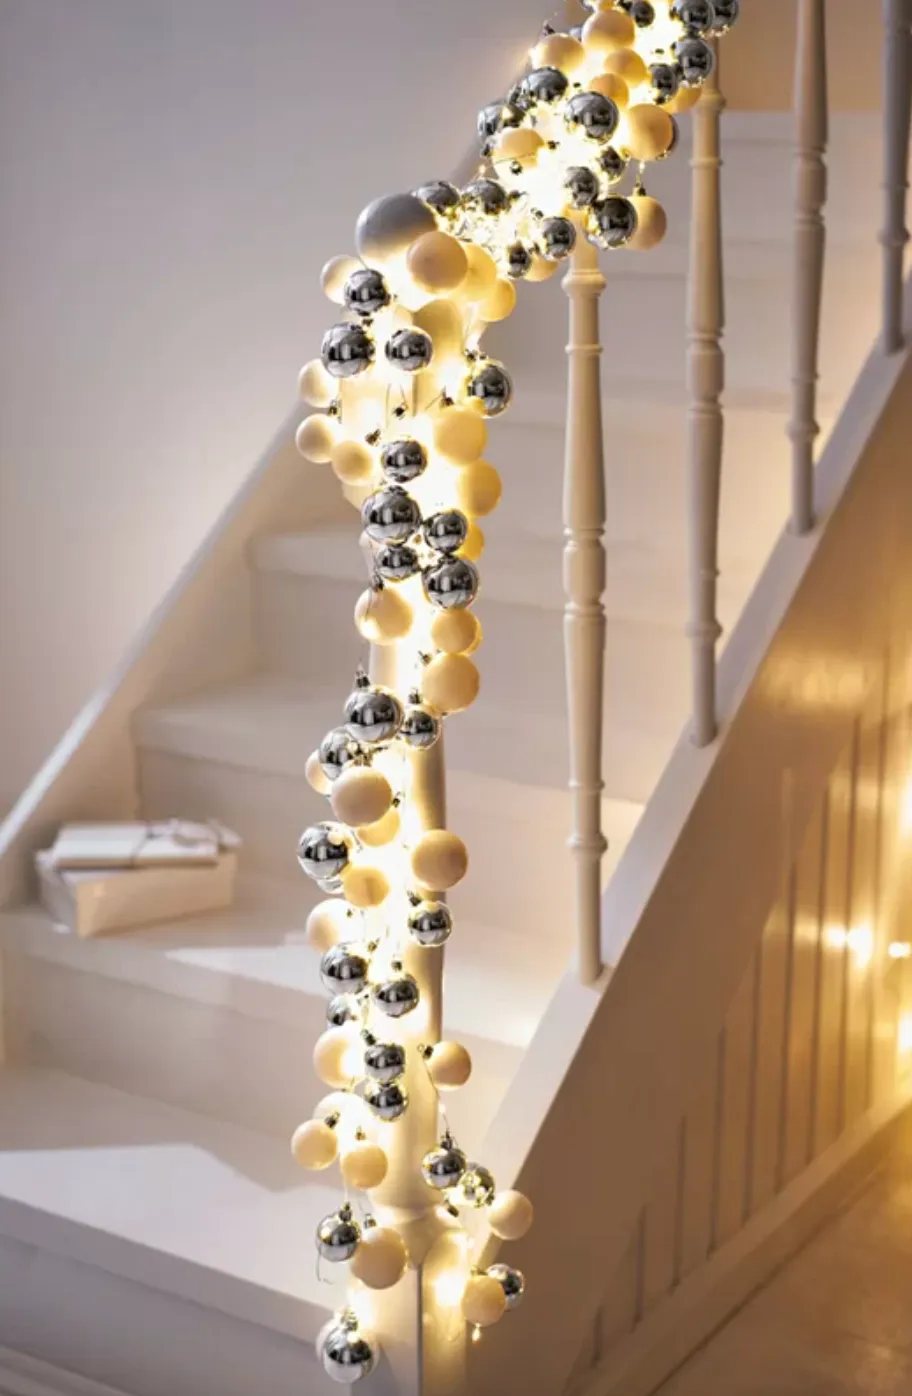  Silver Bauble Christmas Garland with Lights